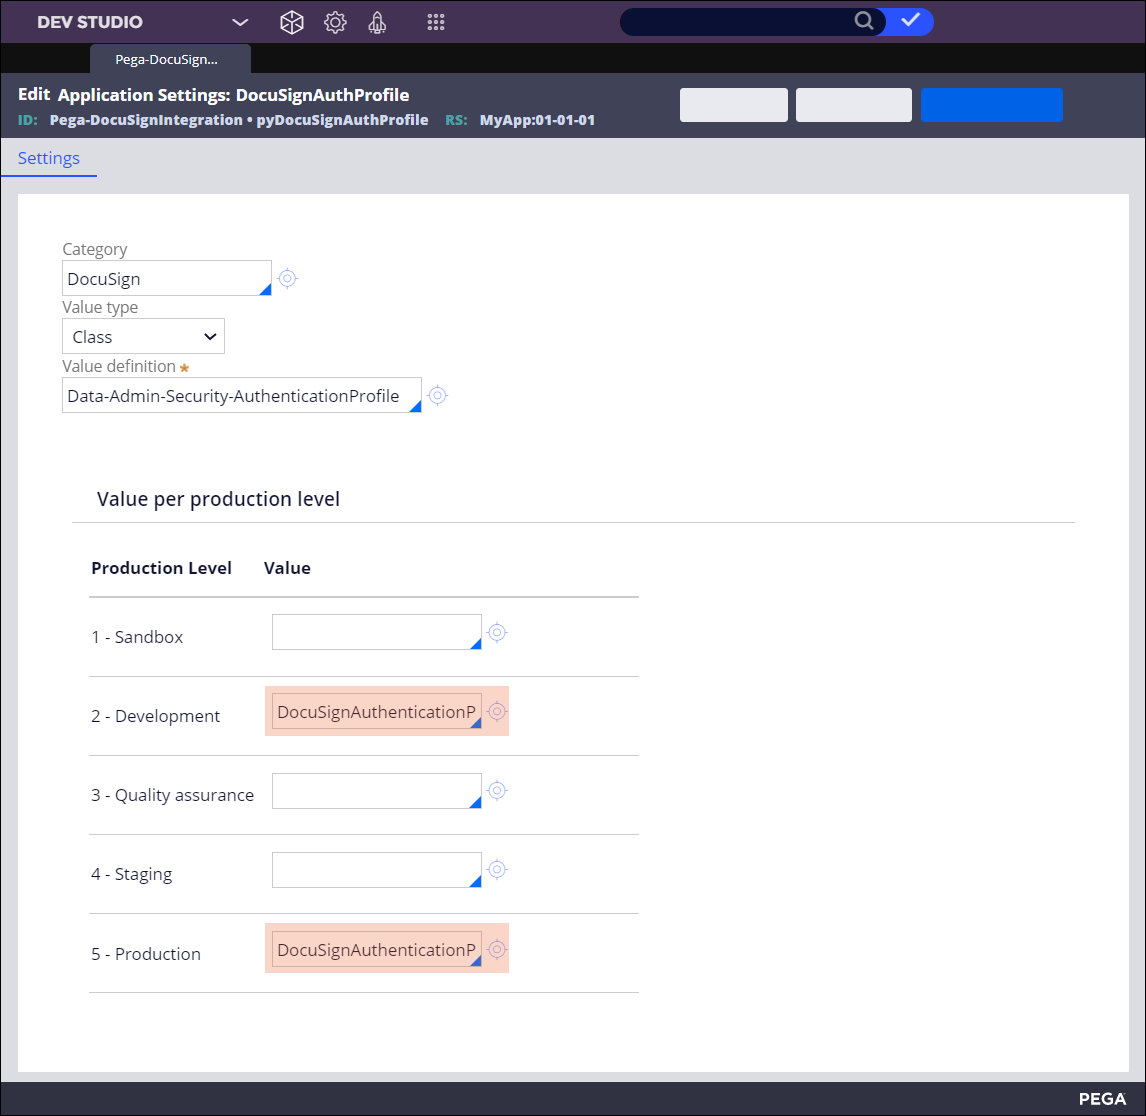 Application setting rule form for the DocuSign connection details.